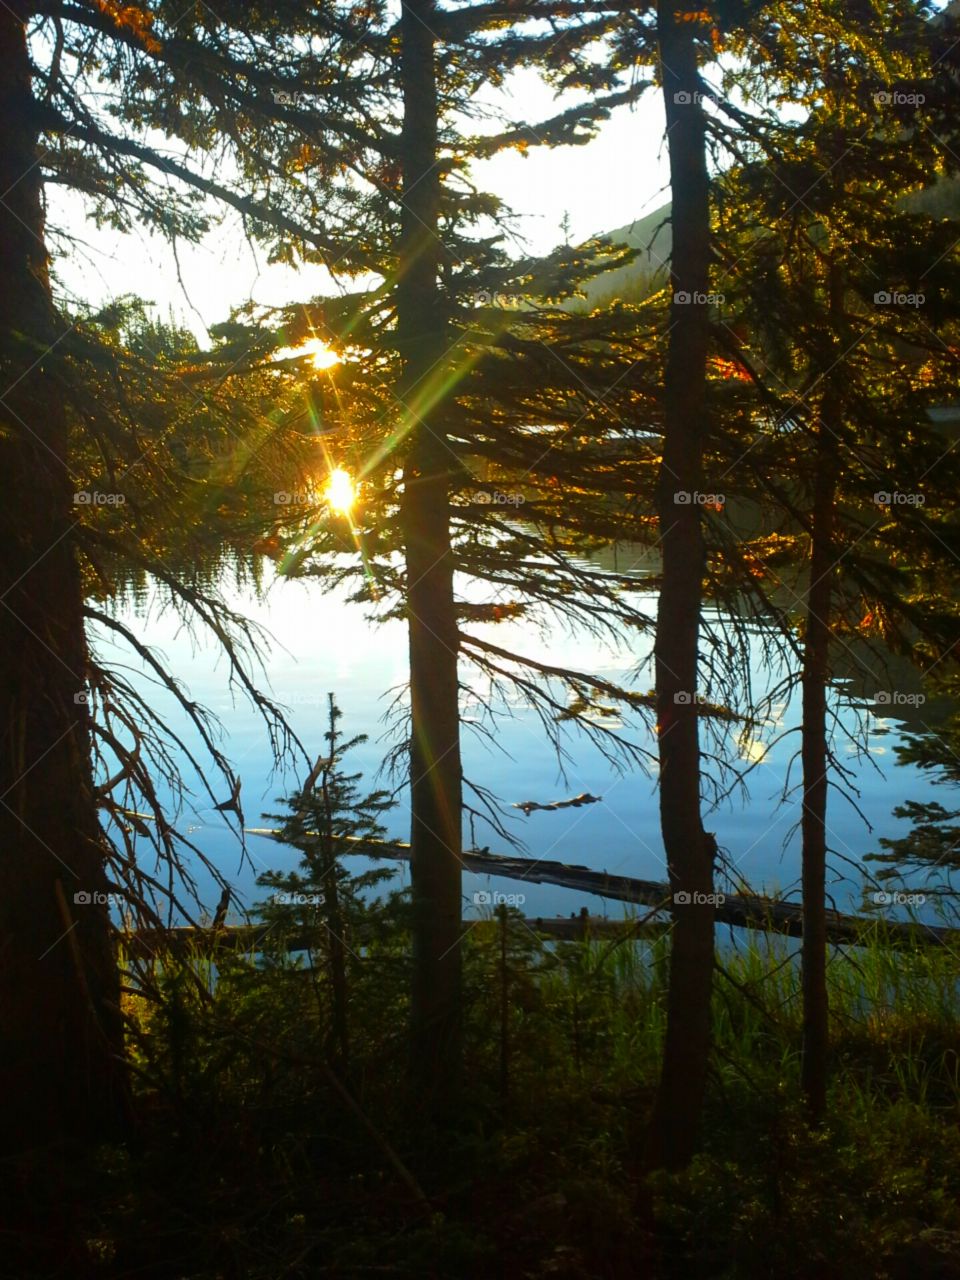 Beginning of day. Caught the sun just right bouncing off the lake as I hiked in Rocky Mountain National Park.